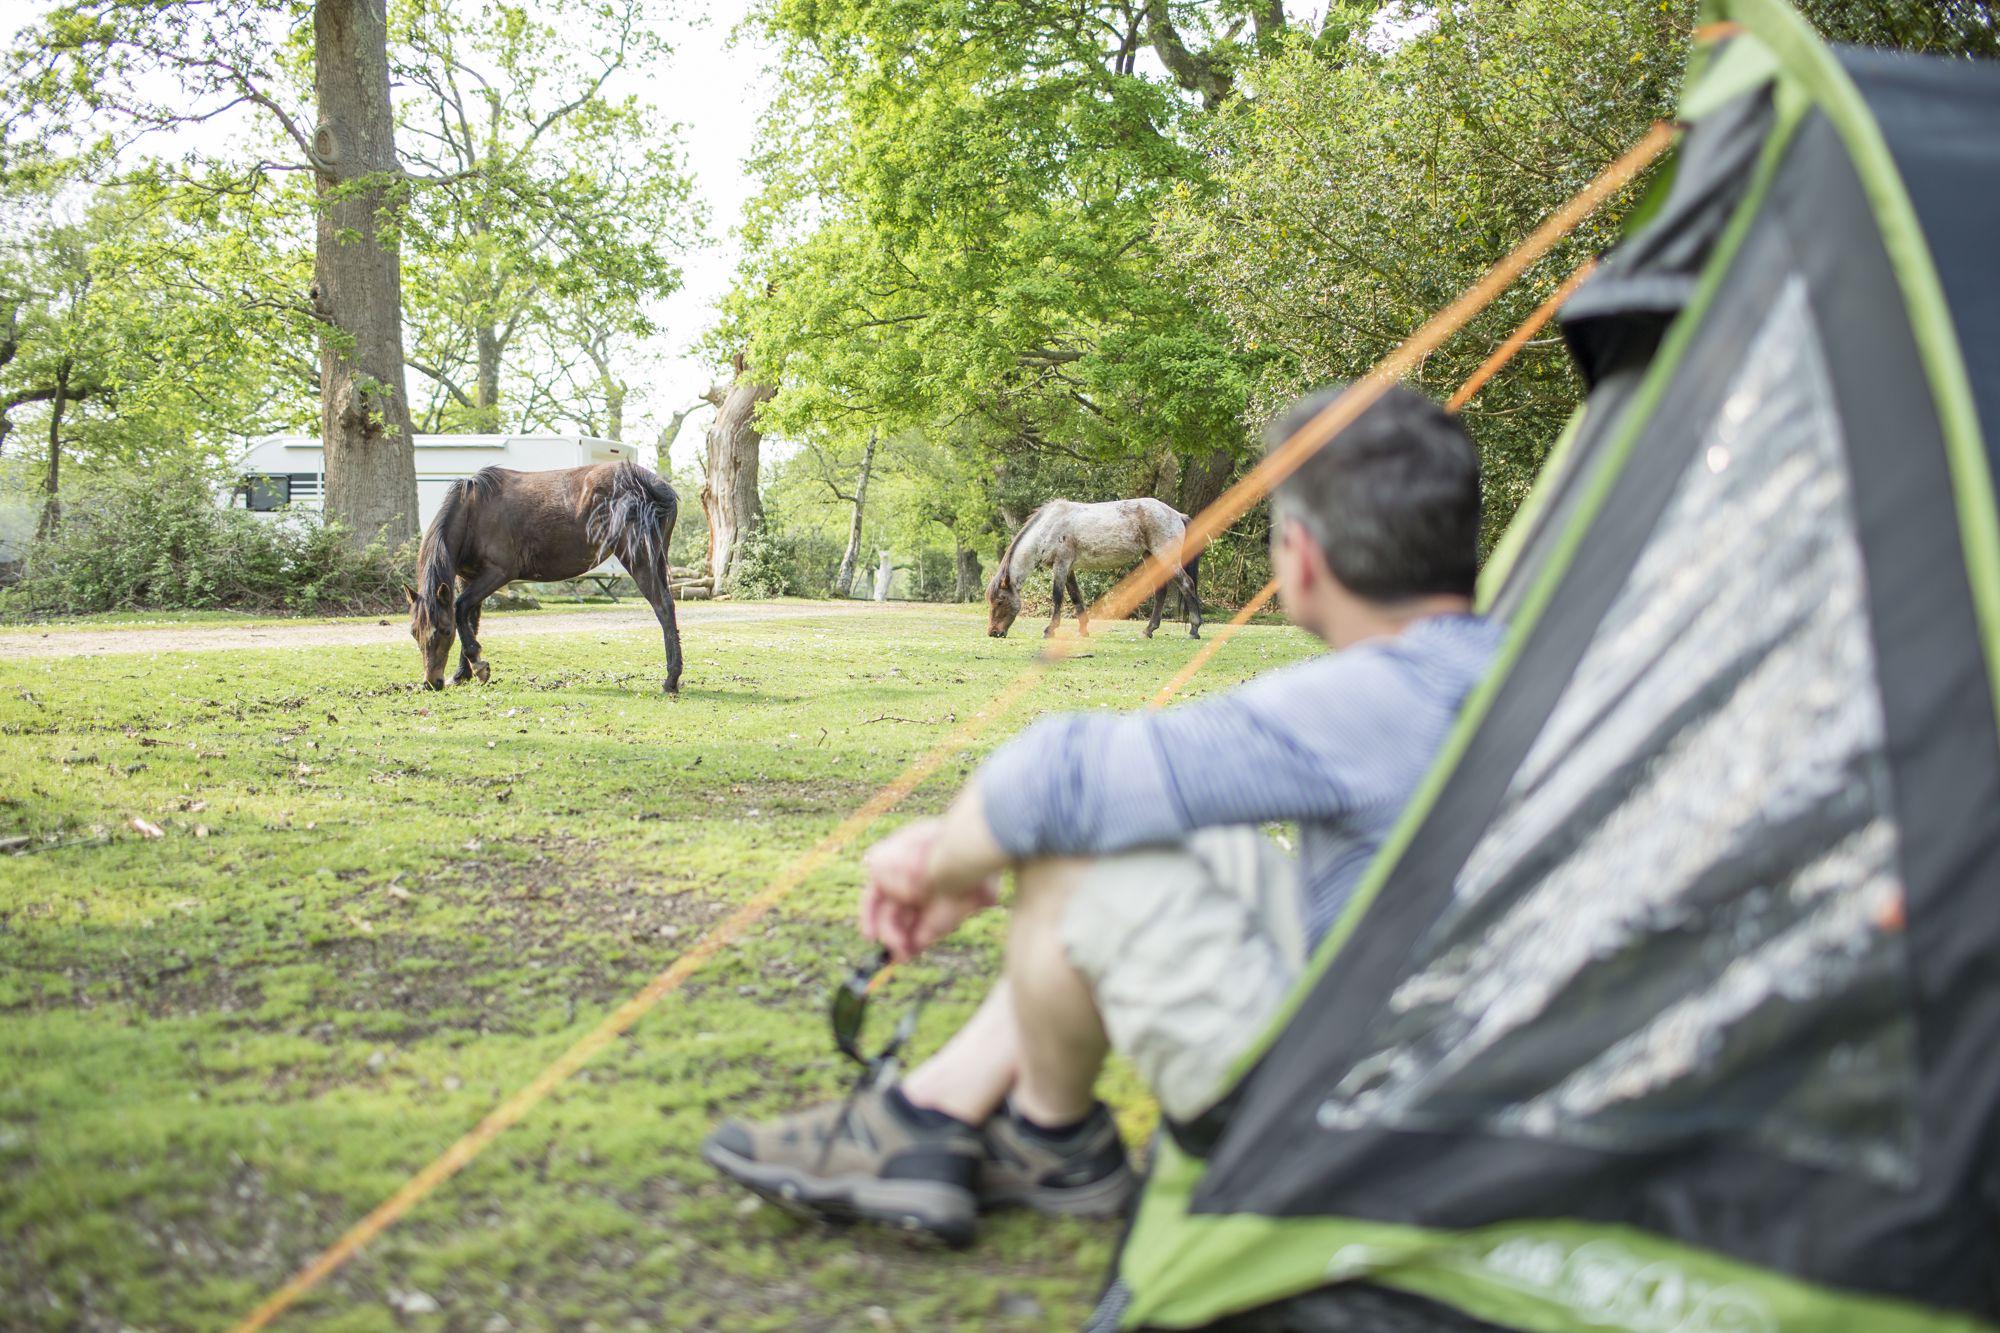 Southampton Camping | Best campsites in Southampton, Hampshire